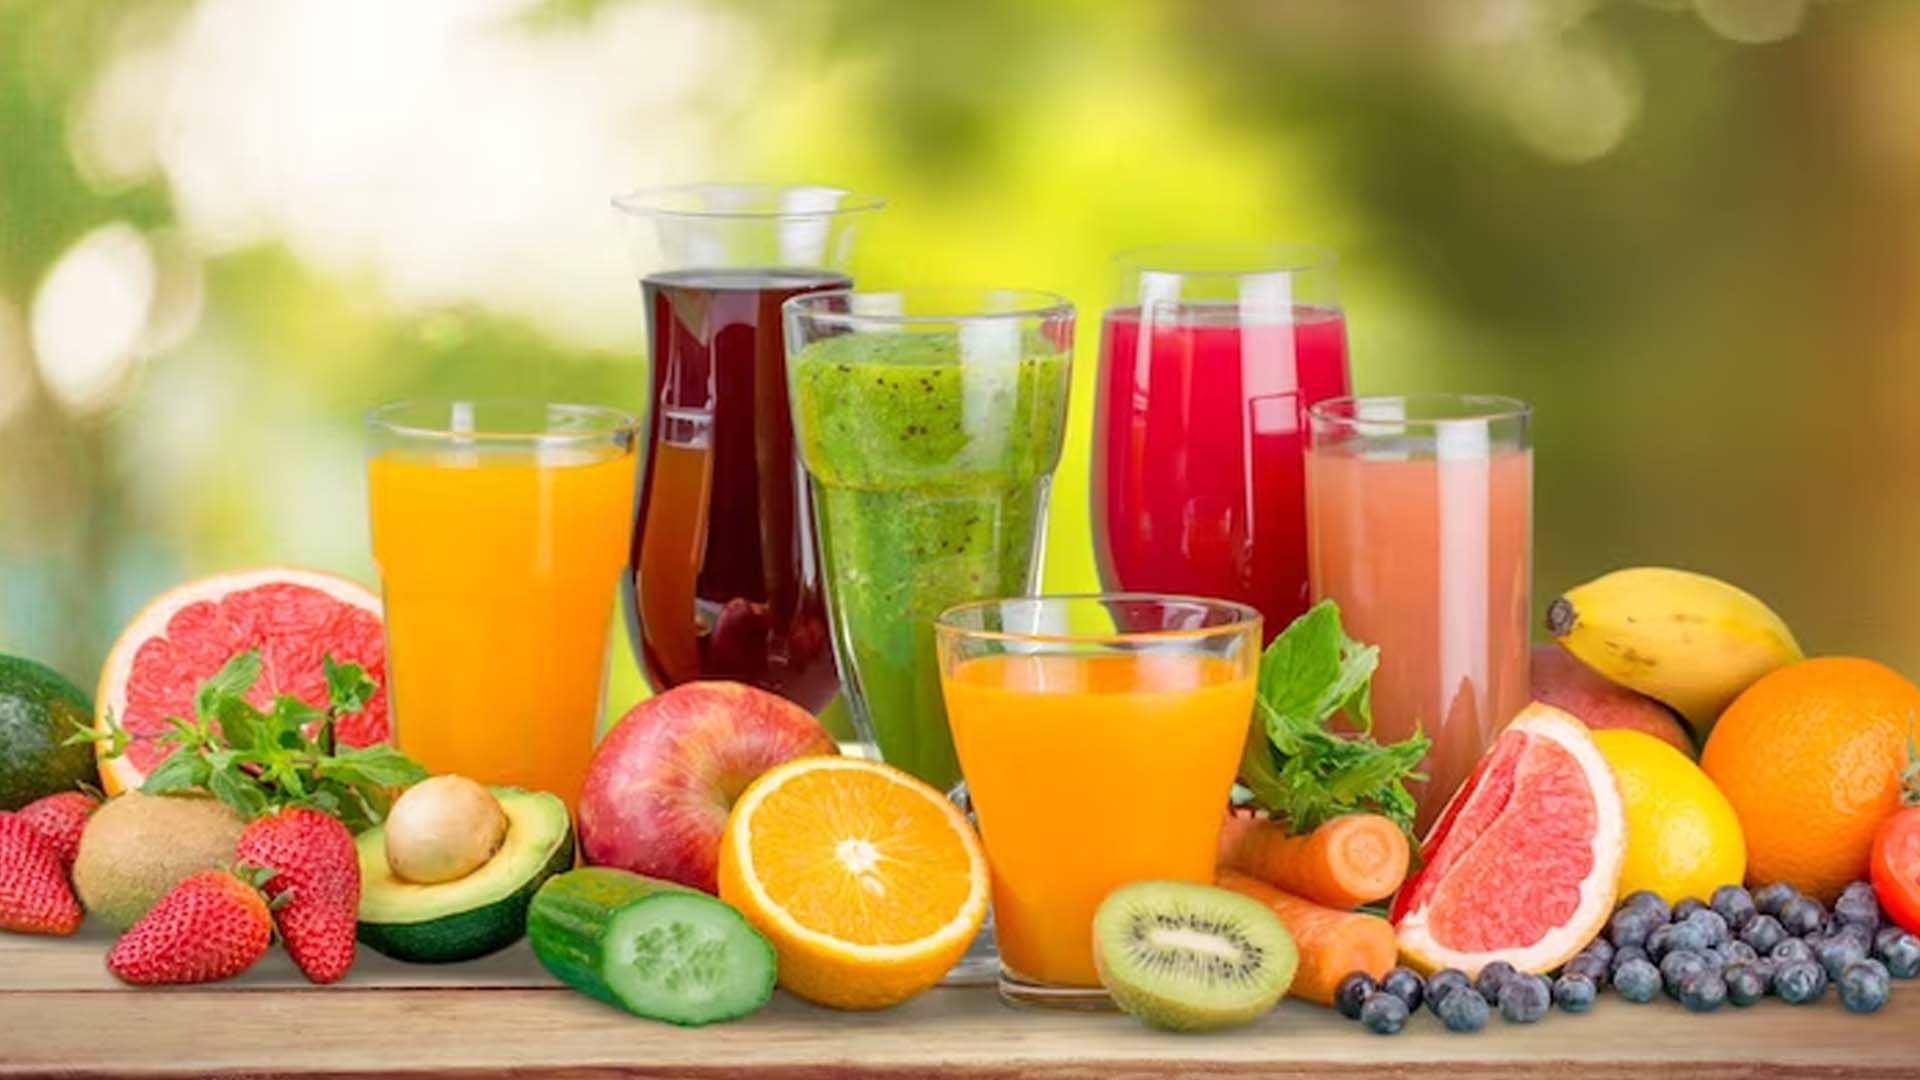 Why Eating Whole Fruit Is Better Than Drinking Fruit Juice?